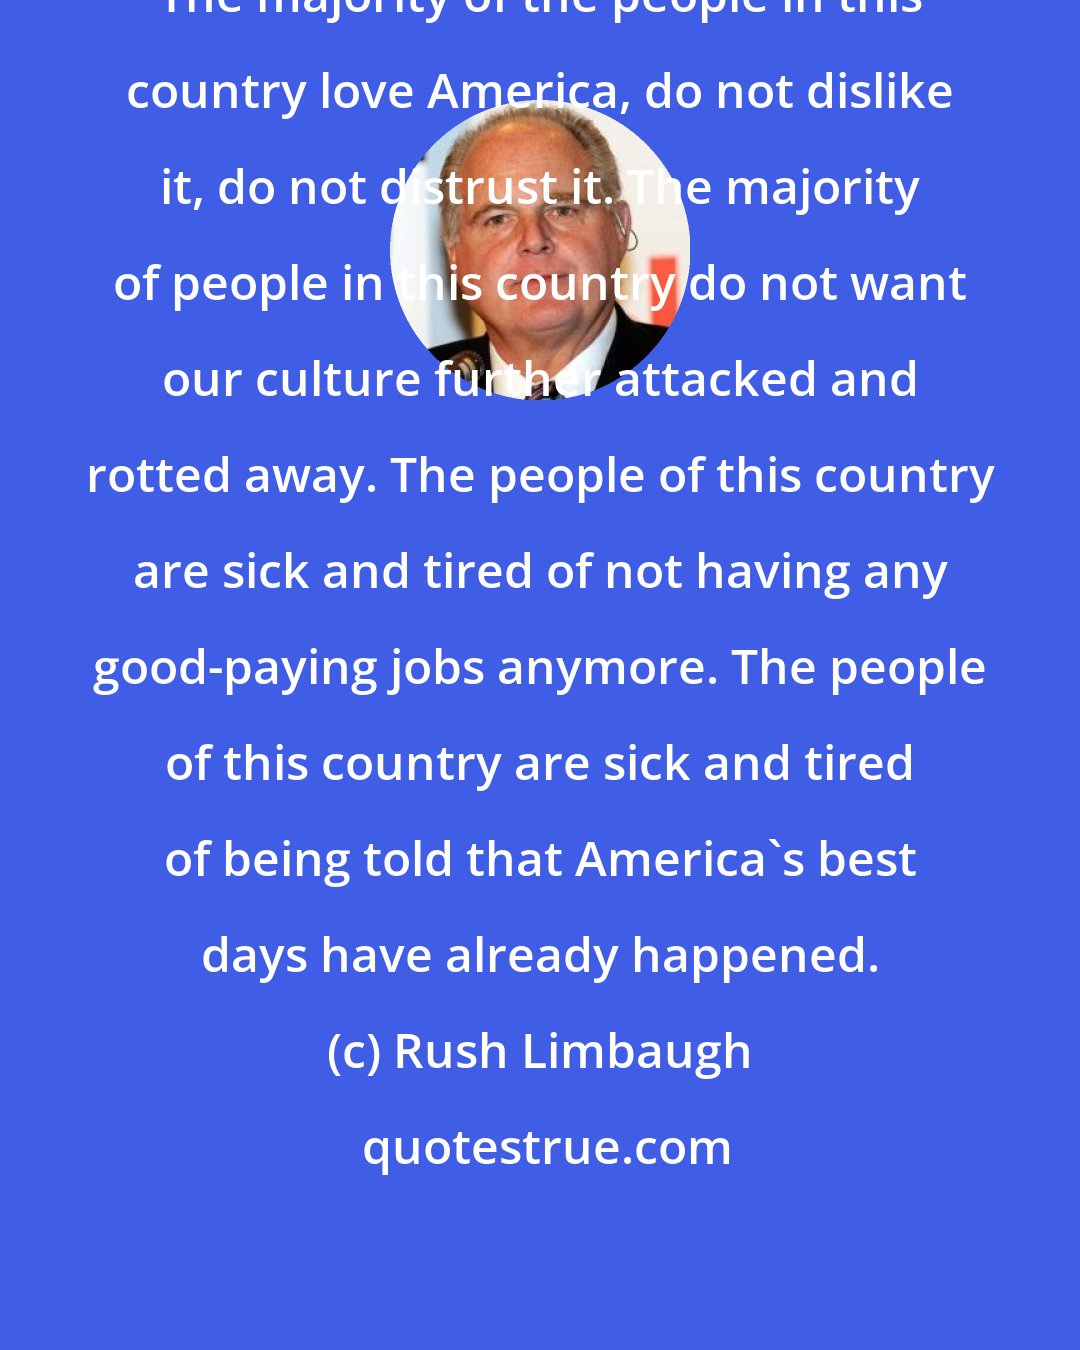 Rush Limbaugh: The majority of the people in this country love America, do not dislike it, do not distrust it. The majority of people in this country do not want our culture further attacked and rotted away. The people of this country are sick and tired of not having any good-paying jobs anymore. The people of this country are sick and tired of being told that America's best days have already happened.